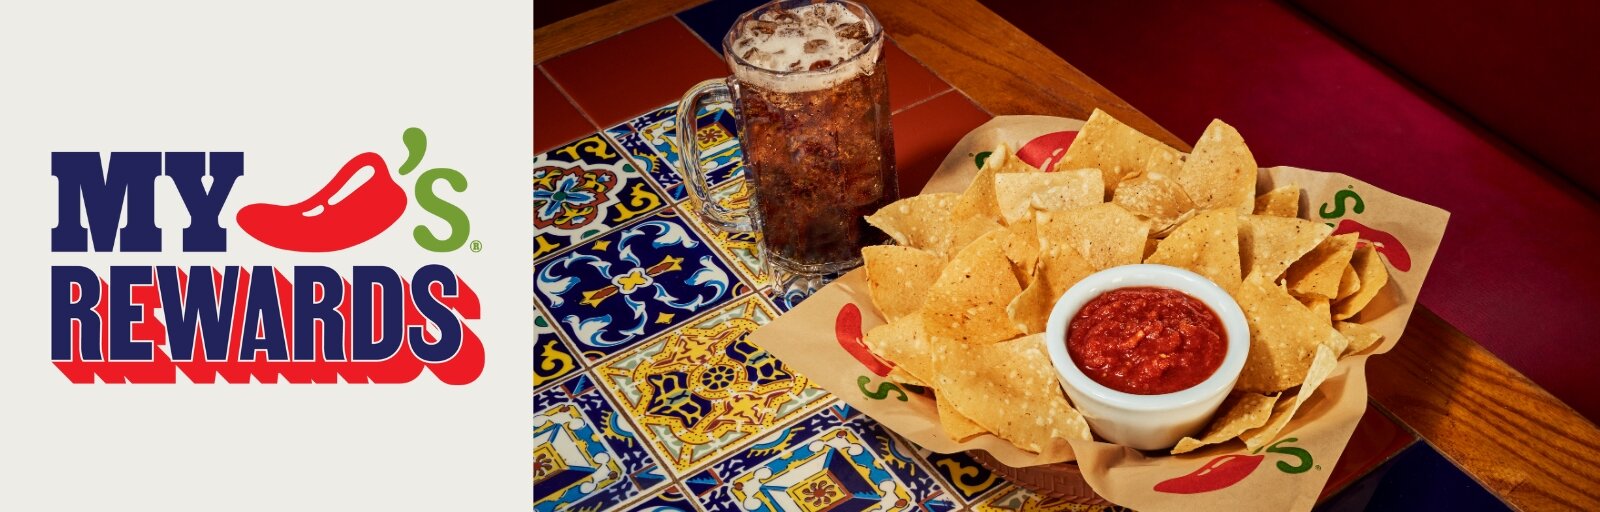 Chili's FREE Chips & Salsa and non-alcoholic beverage for My Chili's Rewards®